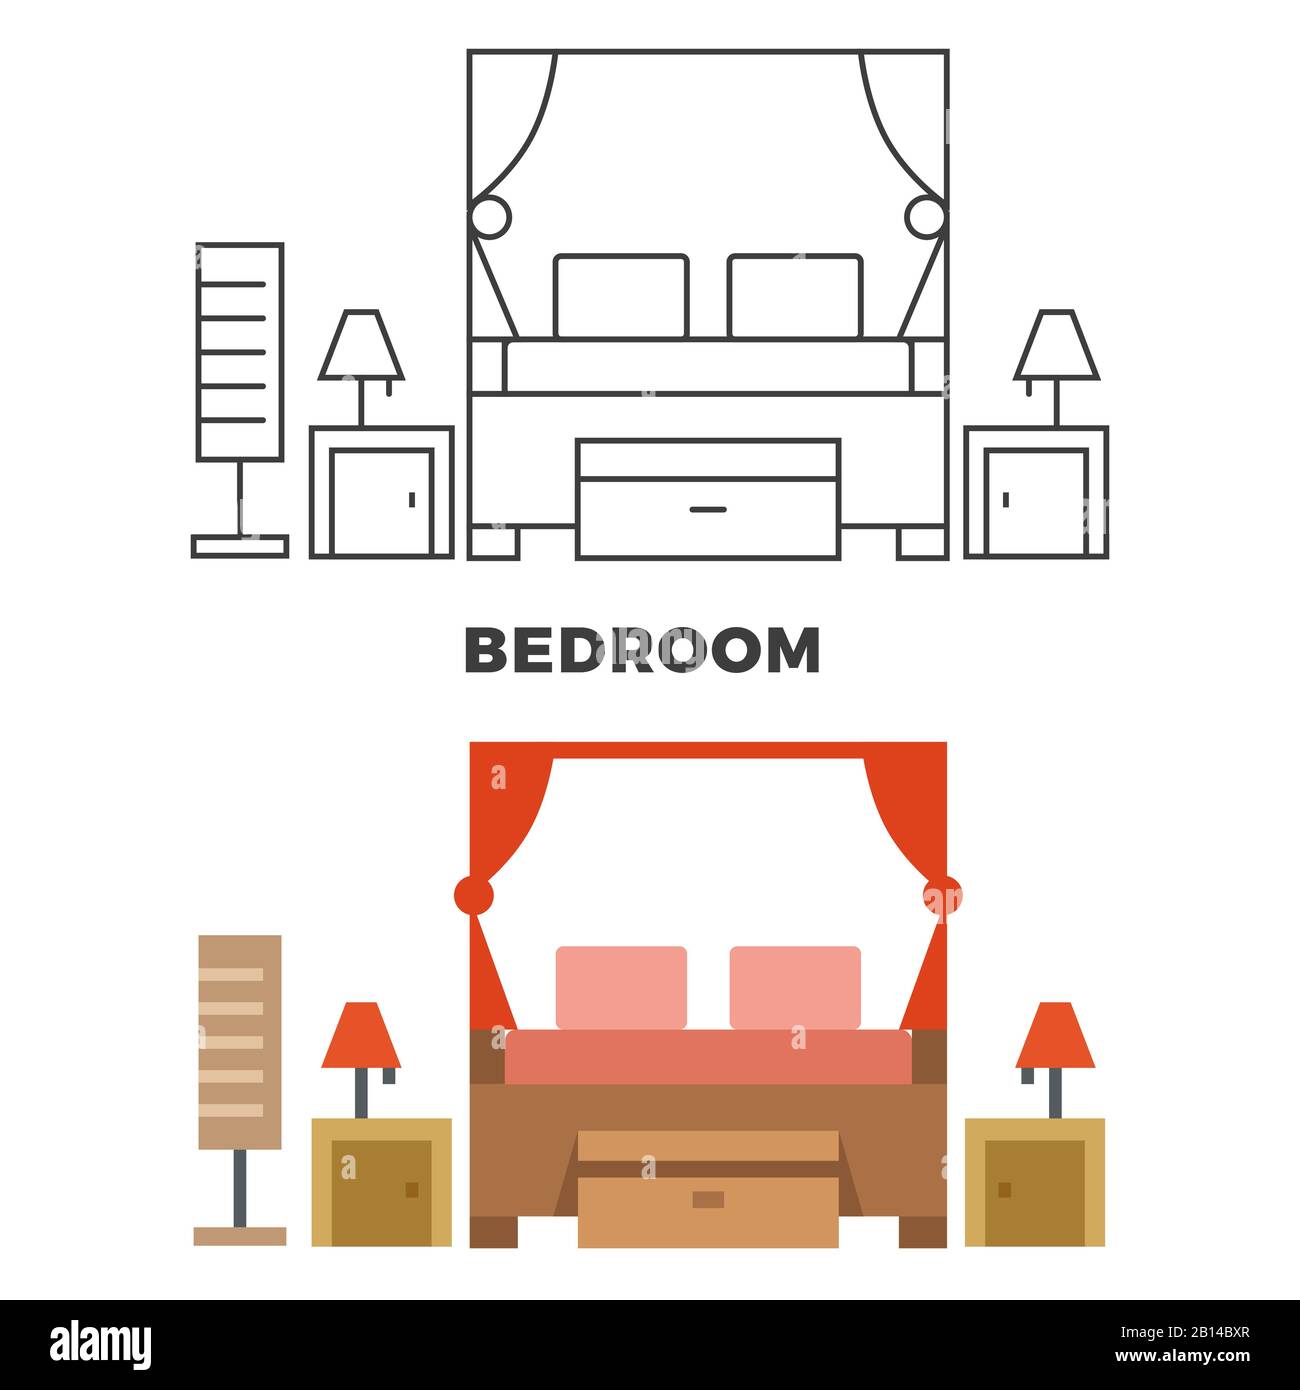 Bedroom concept - flat style and line style bedroom apartment furniture, vector illustration Stock Vector